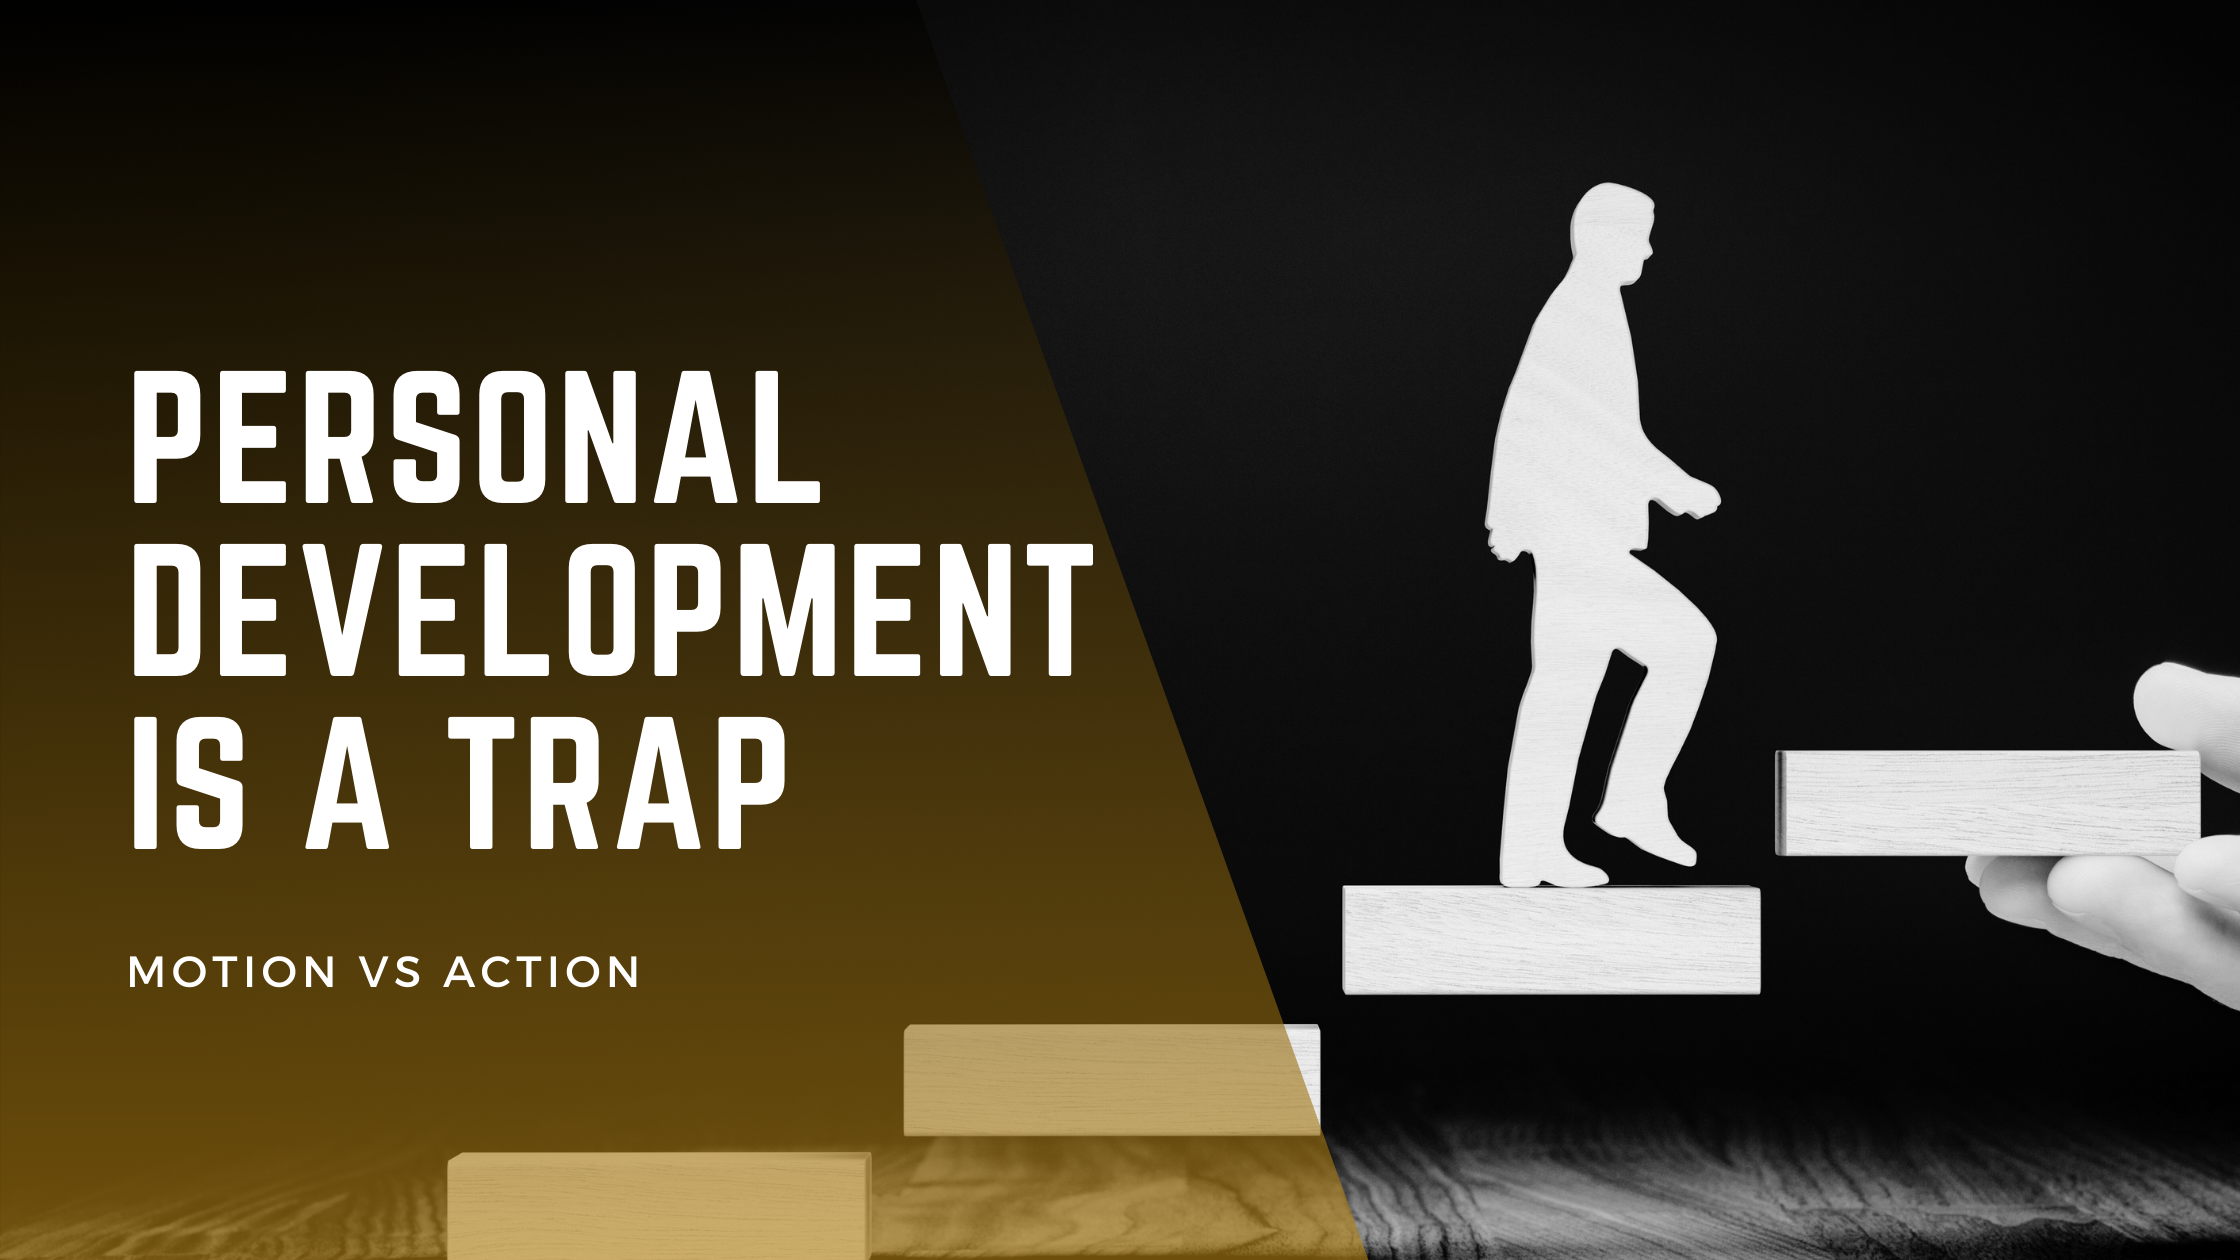 Why personal development is a trap